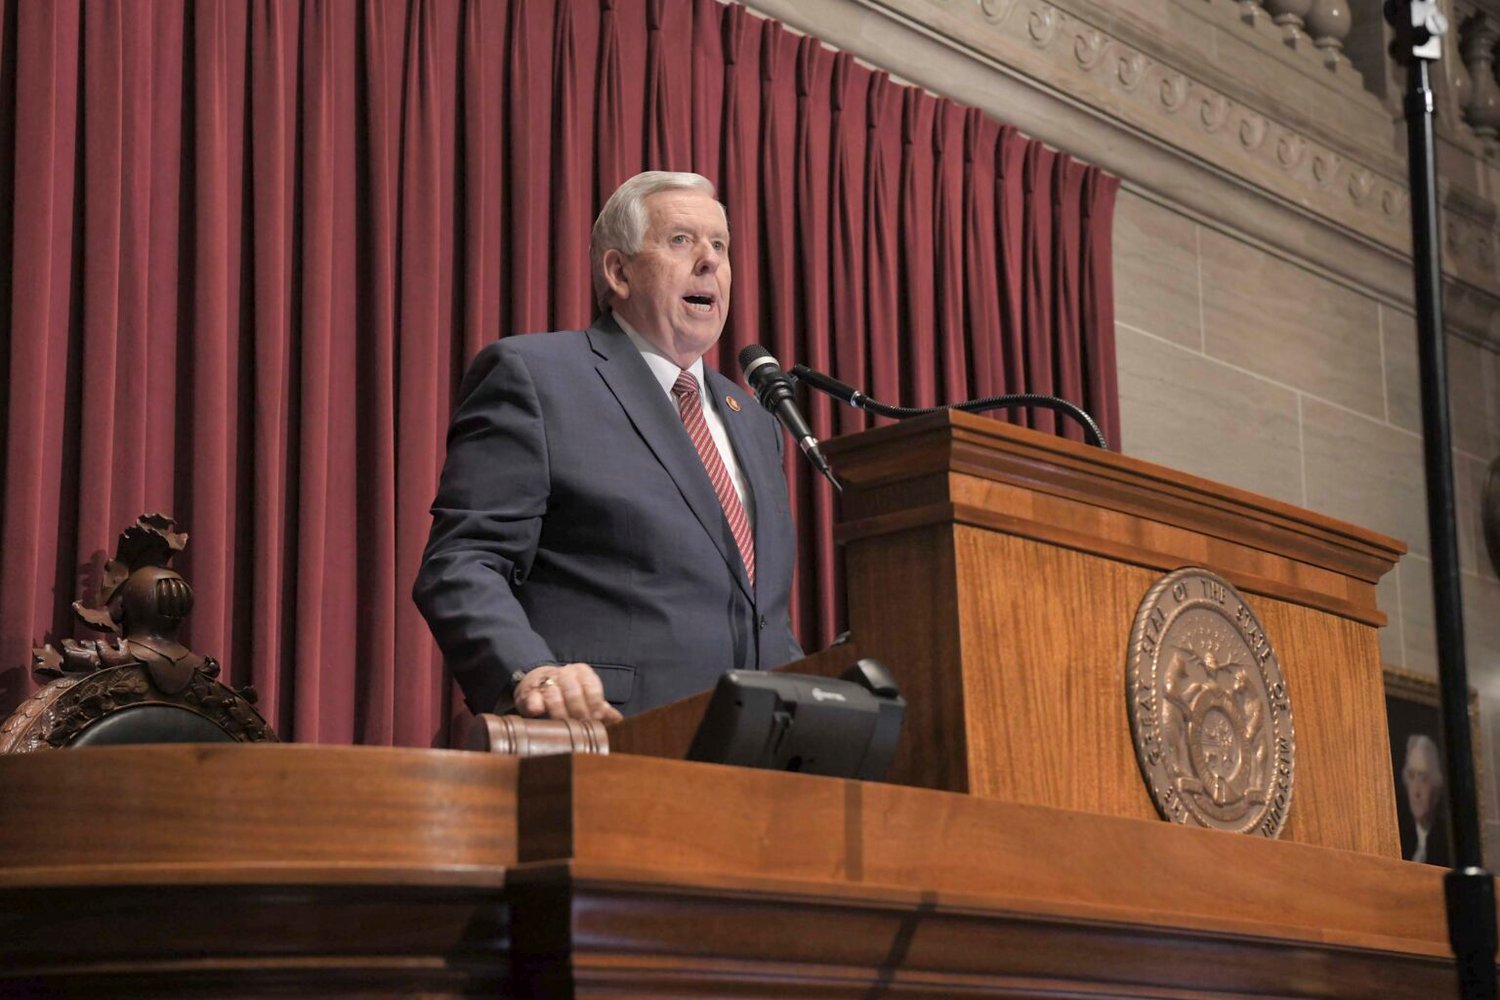 Missouri Gov. Mike Parson delivered his annual State of the State Address on Jan. 18, 2023.